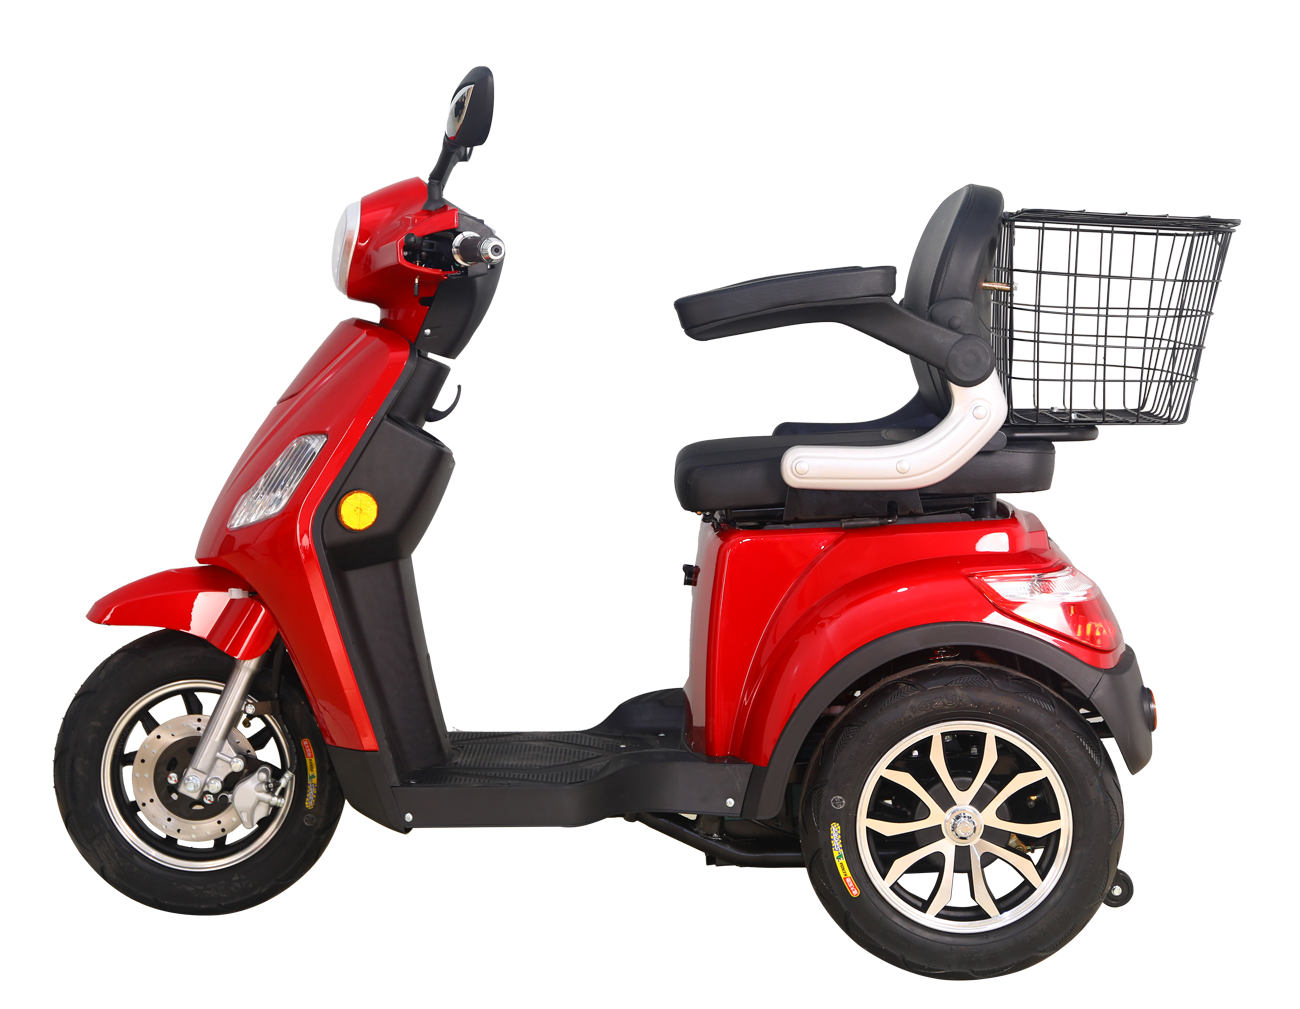 Supply 60V SILO Electric Passenger Tricycle, 60V SILO Electric Passenger Tricycle Factory Quotes, 60V SILO Electric Passenger Tricycle Producers